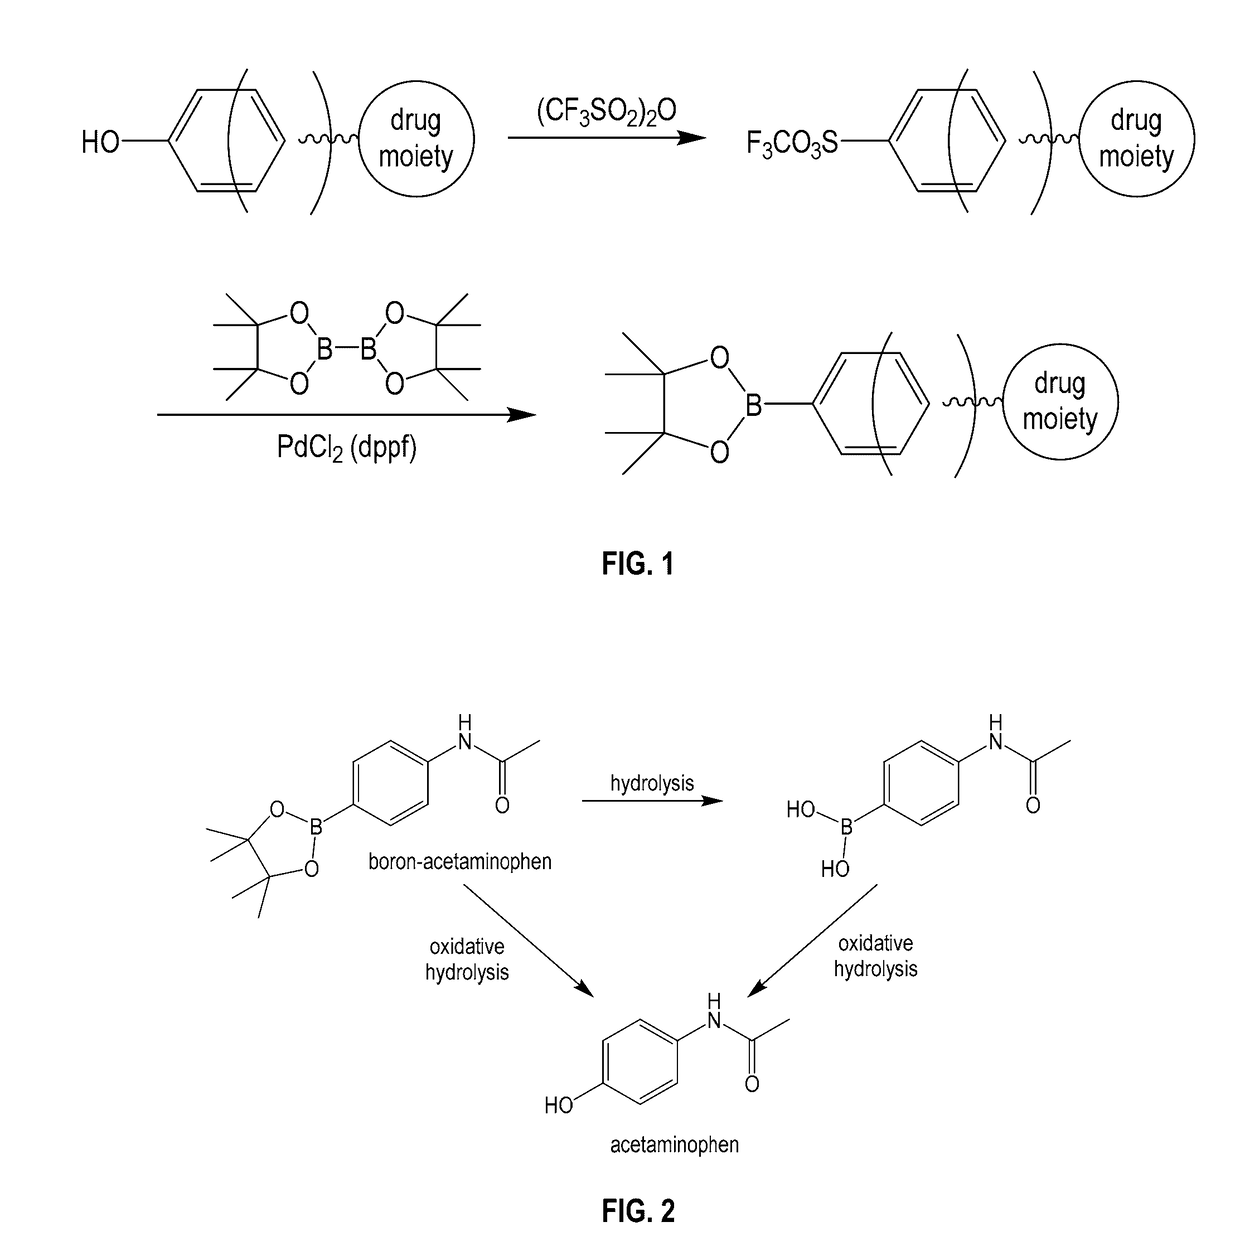 Boron-based prodrug strategy for increased bioavailability and lower-dosage requirements for drug molecules containing at least one phenol (or aromatic hydroxyl) group